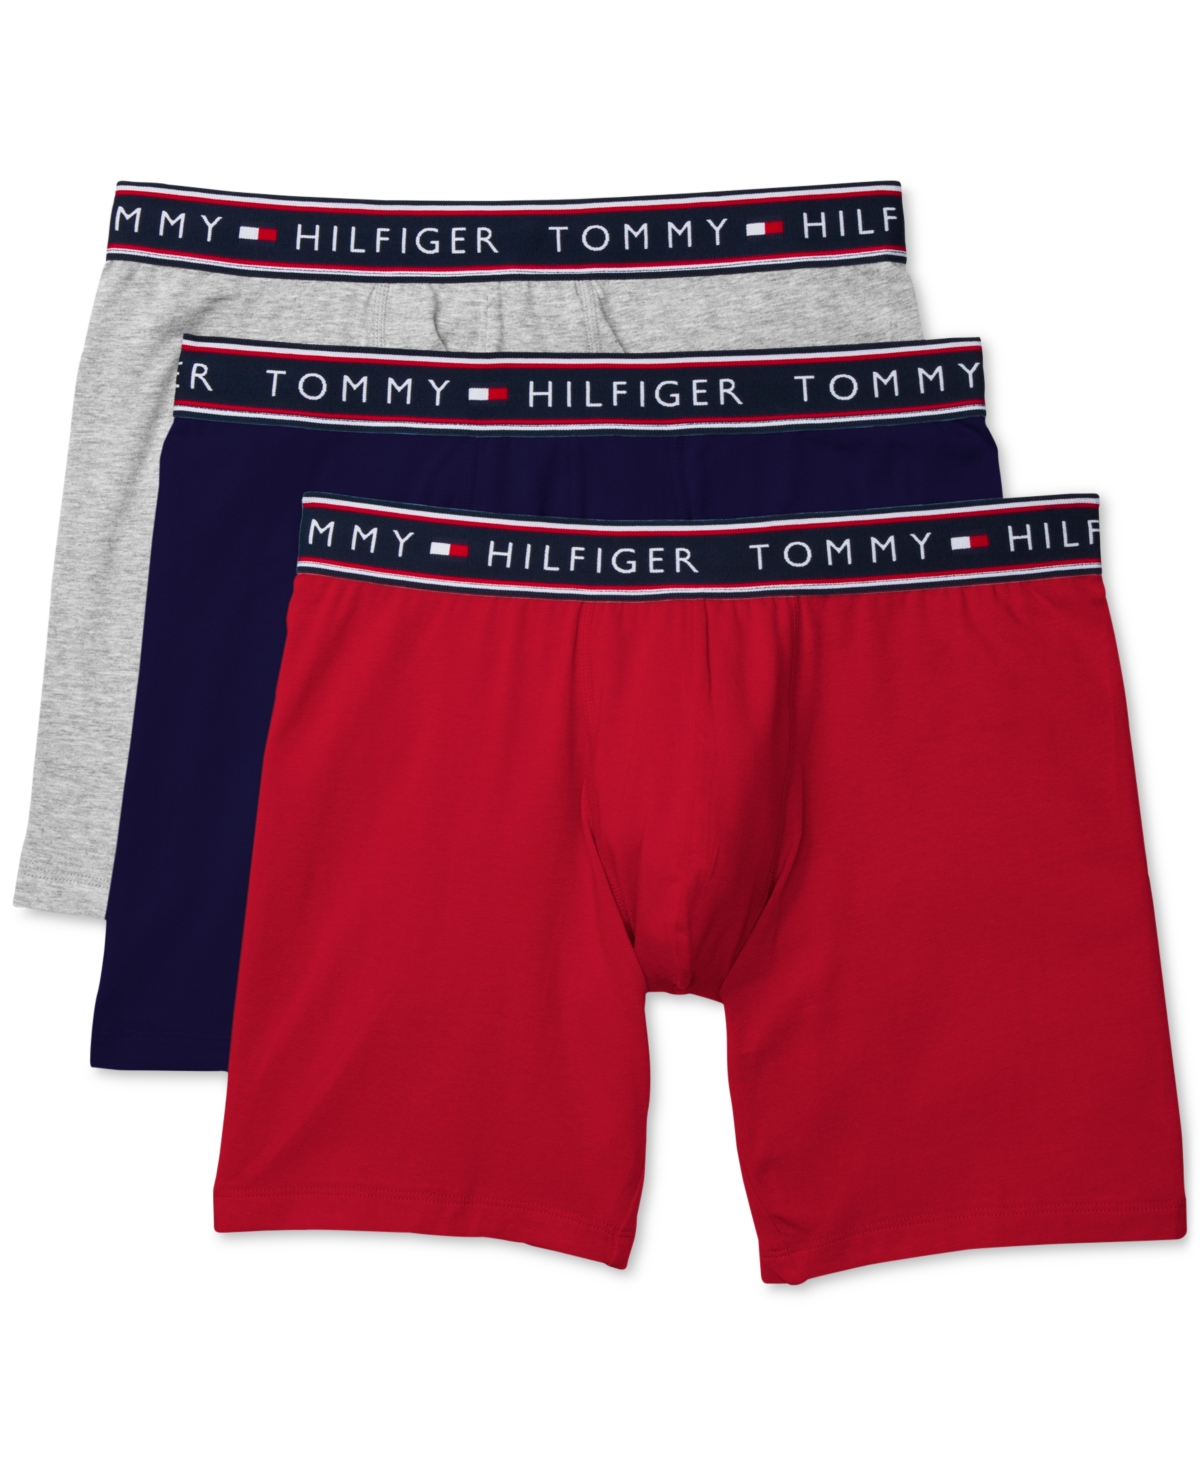 UPC 088541539401 product image for Tommy Hilfiger Men's Cotton Stretch Boxer Brief, 3 Pack | upcitemdb.com